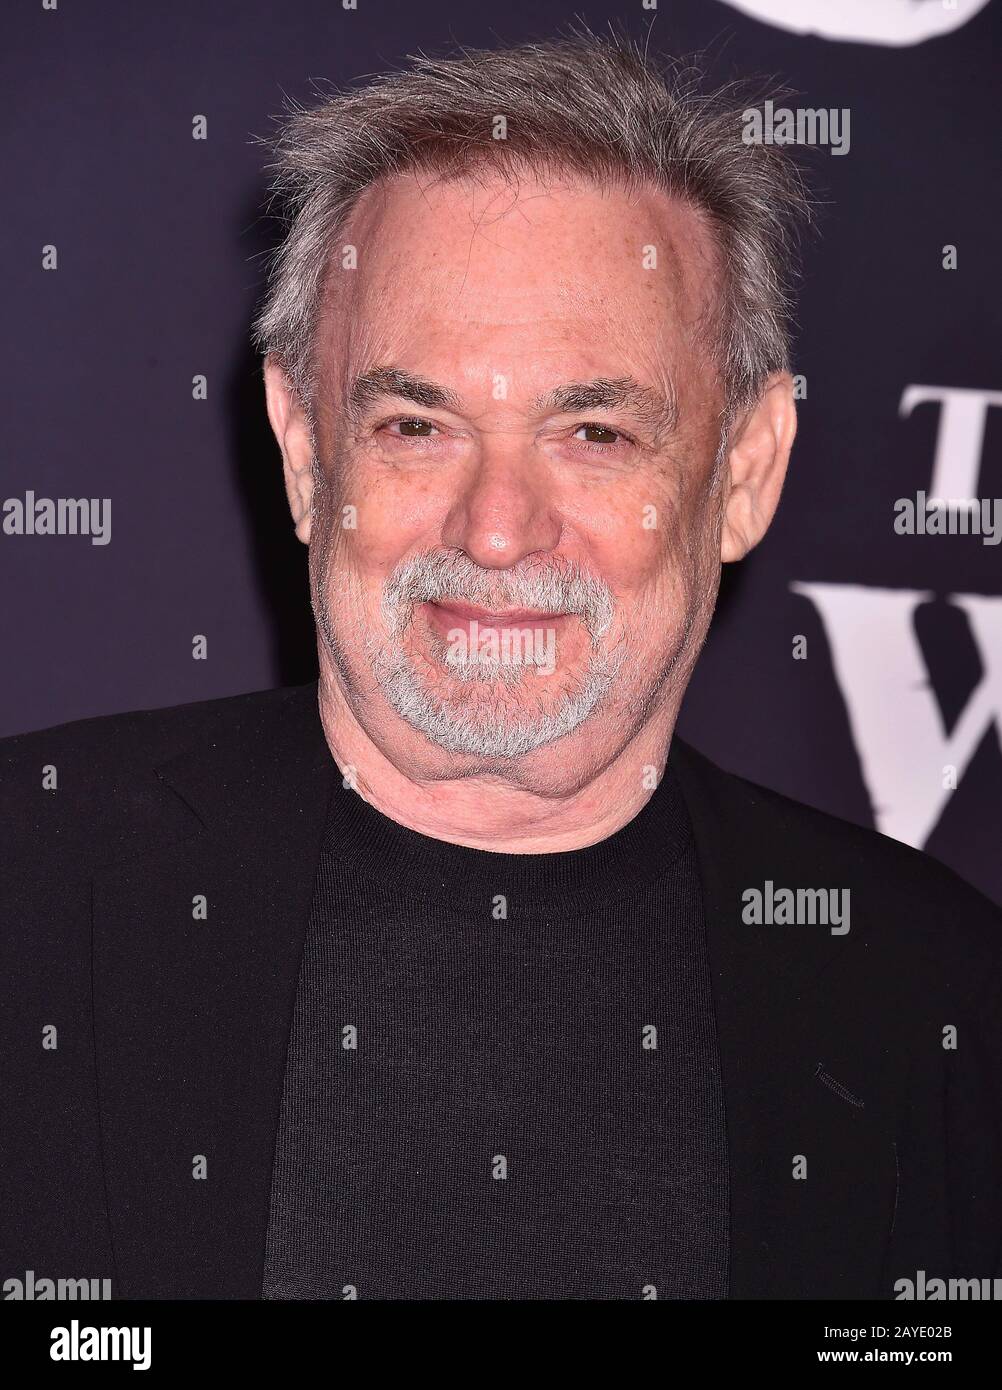 HOLLYWOOD, CA - FEBRUARY 13: Erwin Stoff attends the Premiere of 20th  Century Studios' "The Call of the Wild" at El Capitan Theatre on February  13, 2020 in Los Angeles, California Stock Photo - Alamy